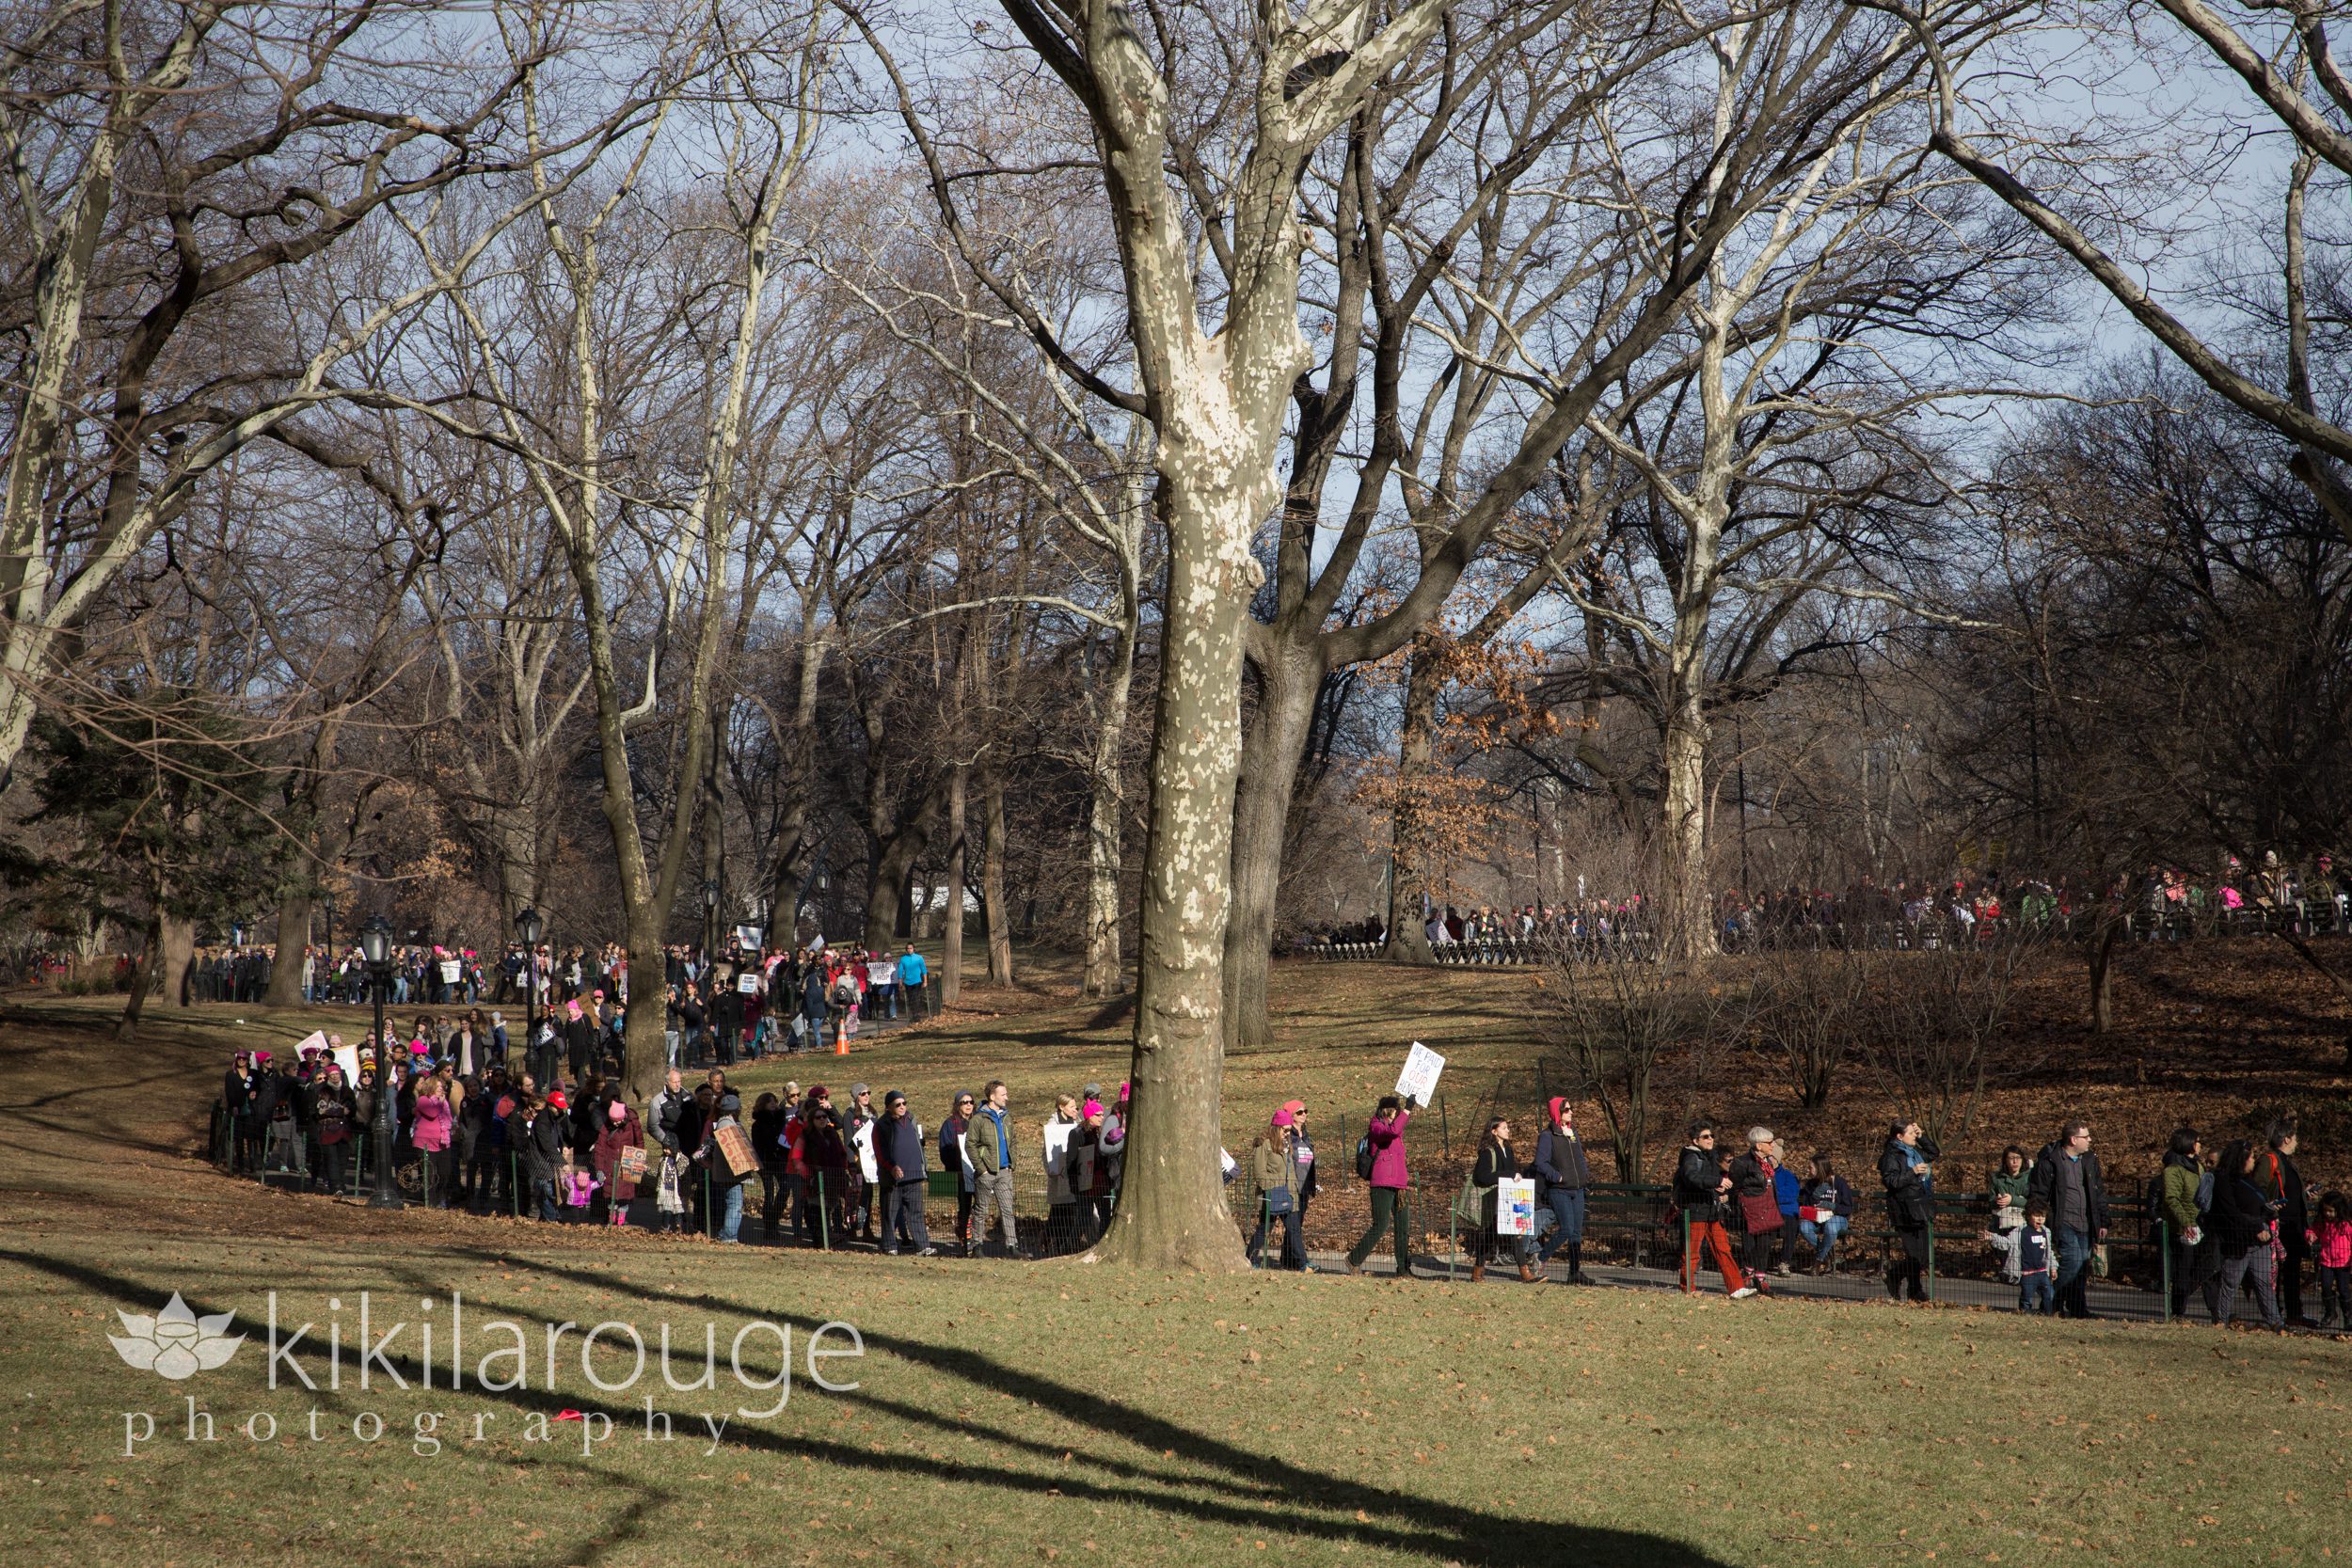 Crowds of people protesting through Central Park